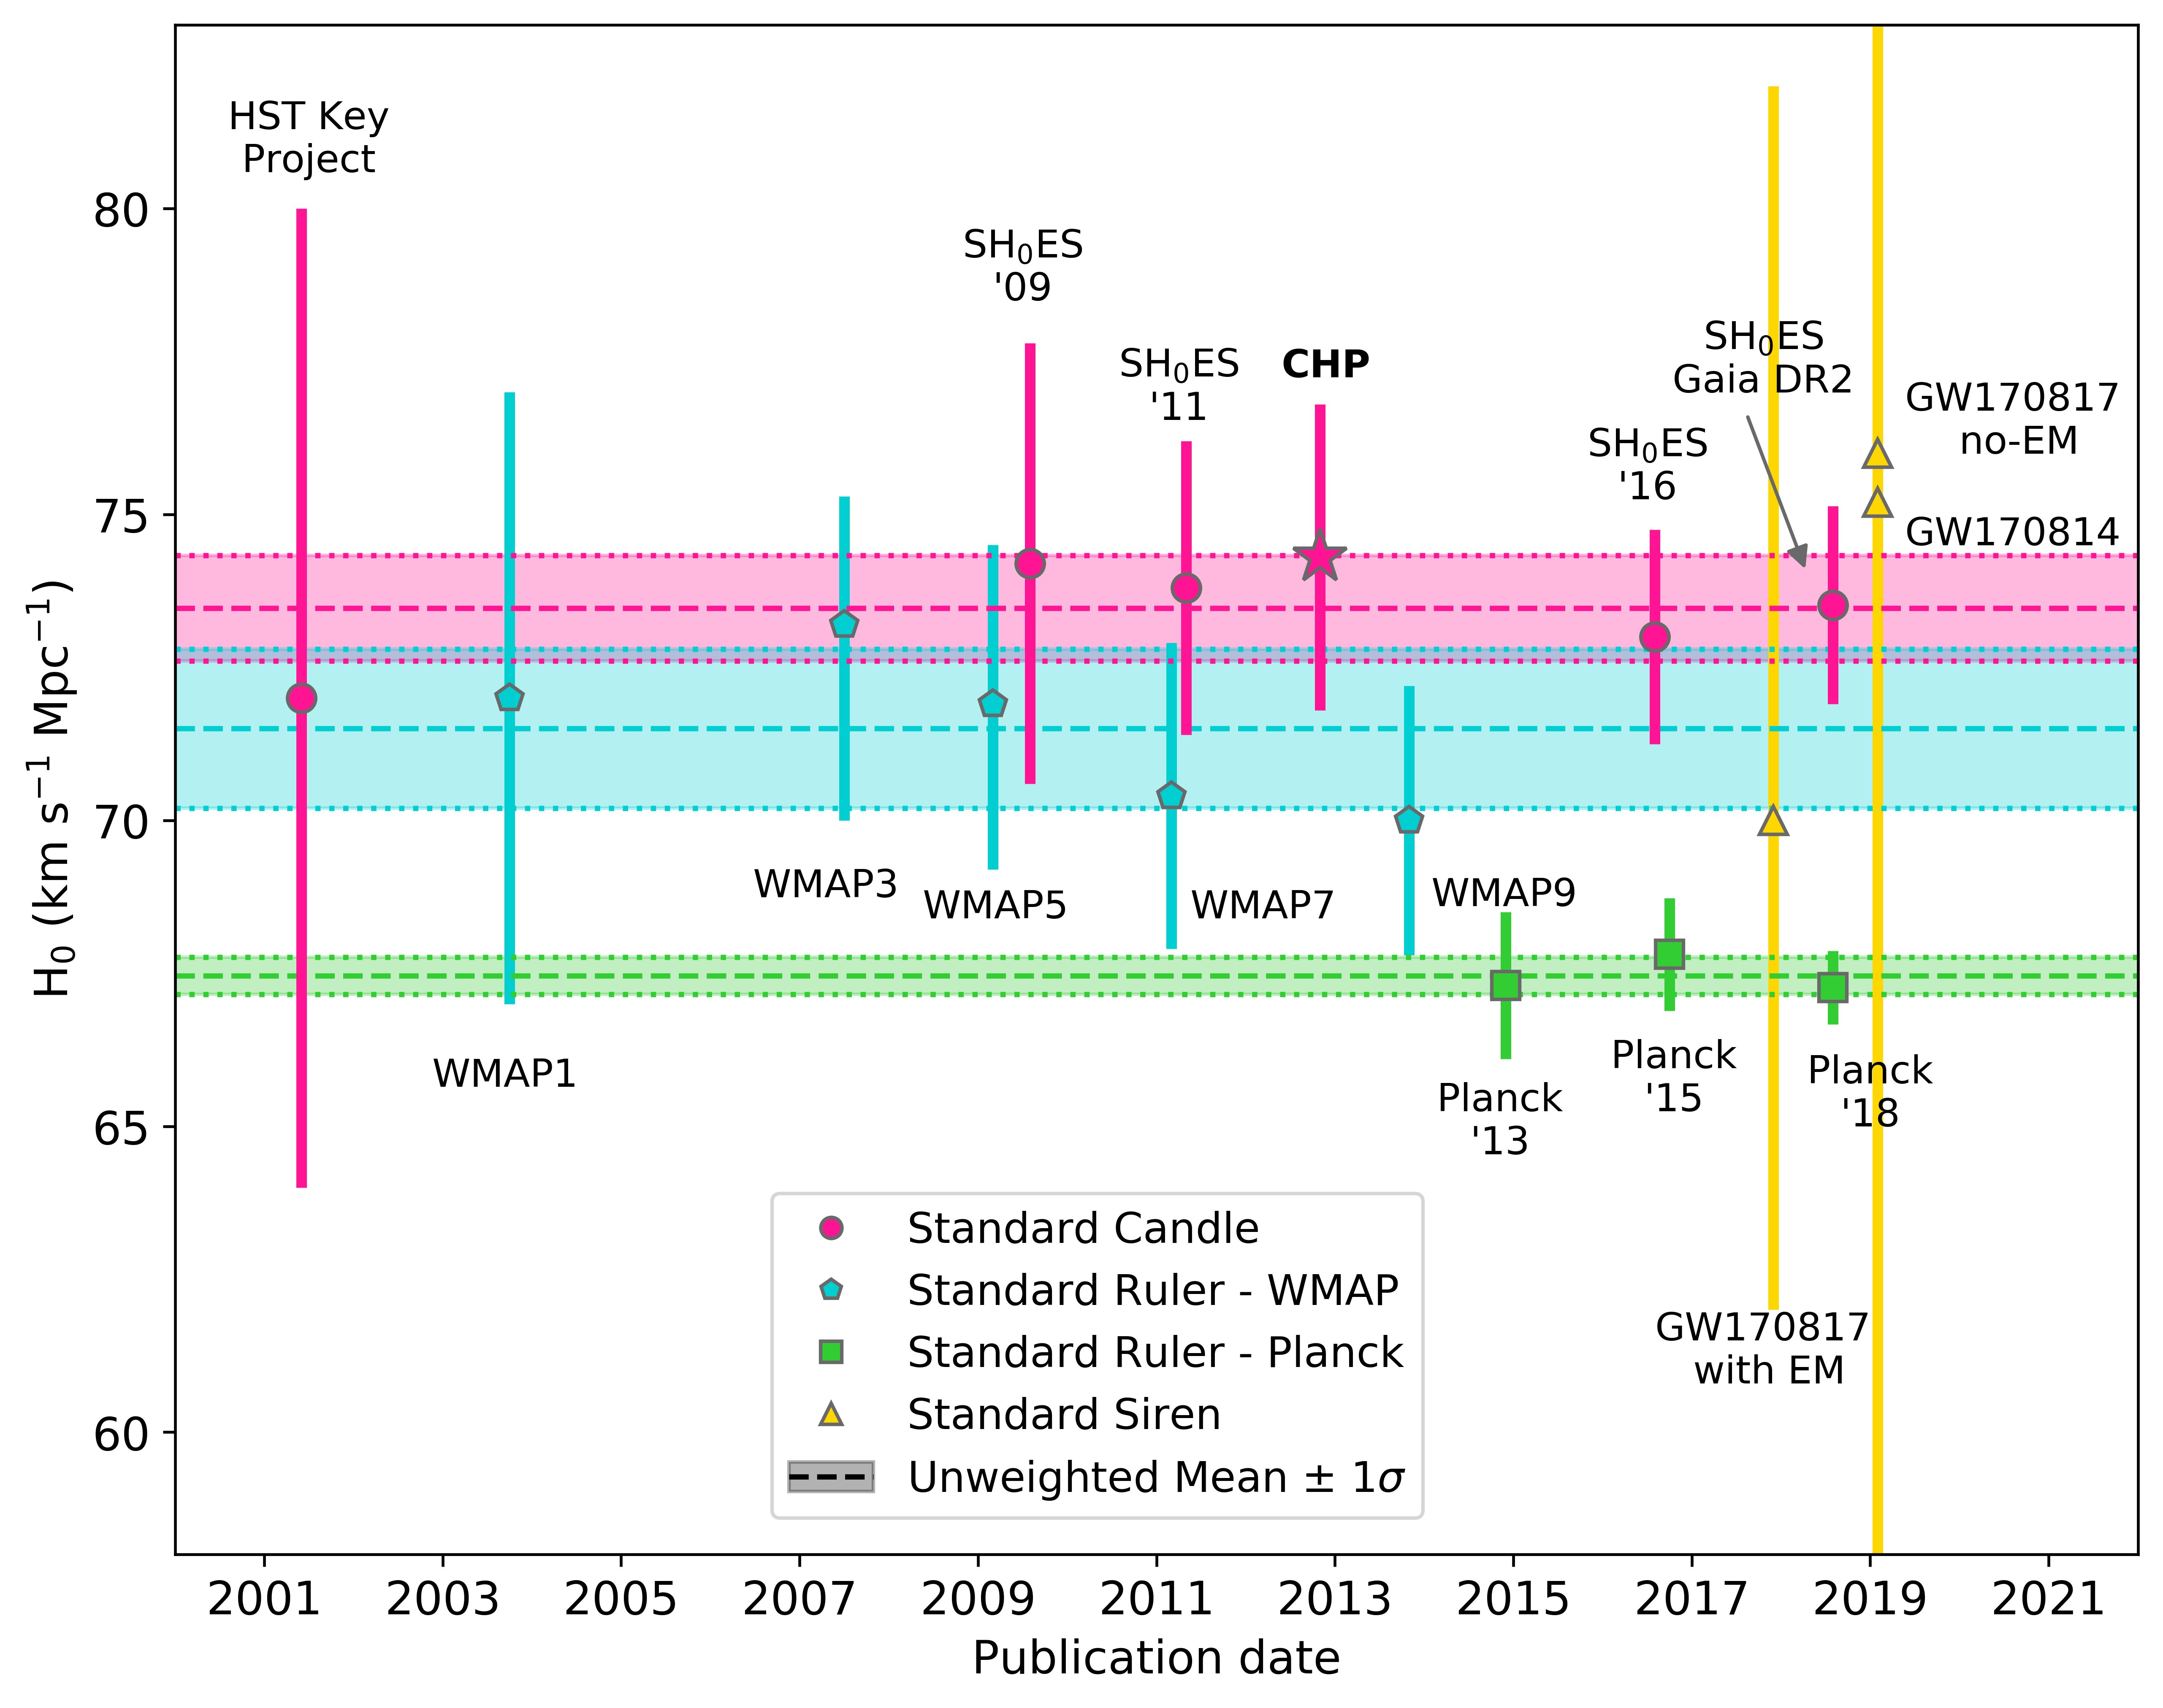 Measurements of $H_0$ from different experiments published since 2001. Pink circles indicate standard candle measurements; blue hexagons indicate standard ruler measurements from the *WMAP* experiment; green squares indicate results from *Planck*; yellow triangles indicate standard siren measurements from gravitational waves.